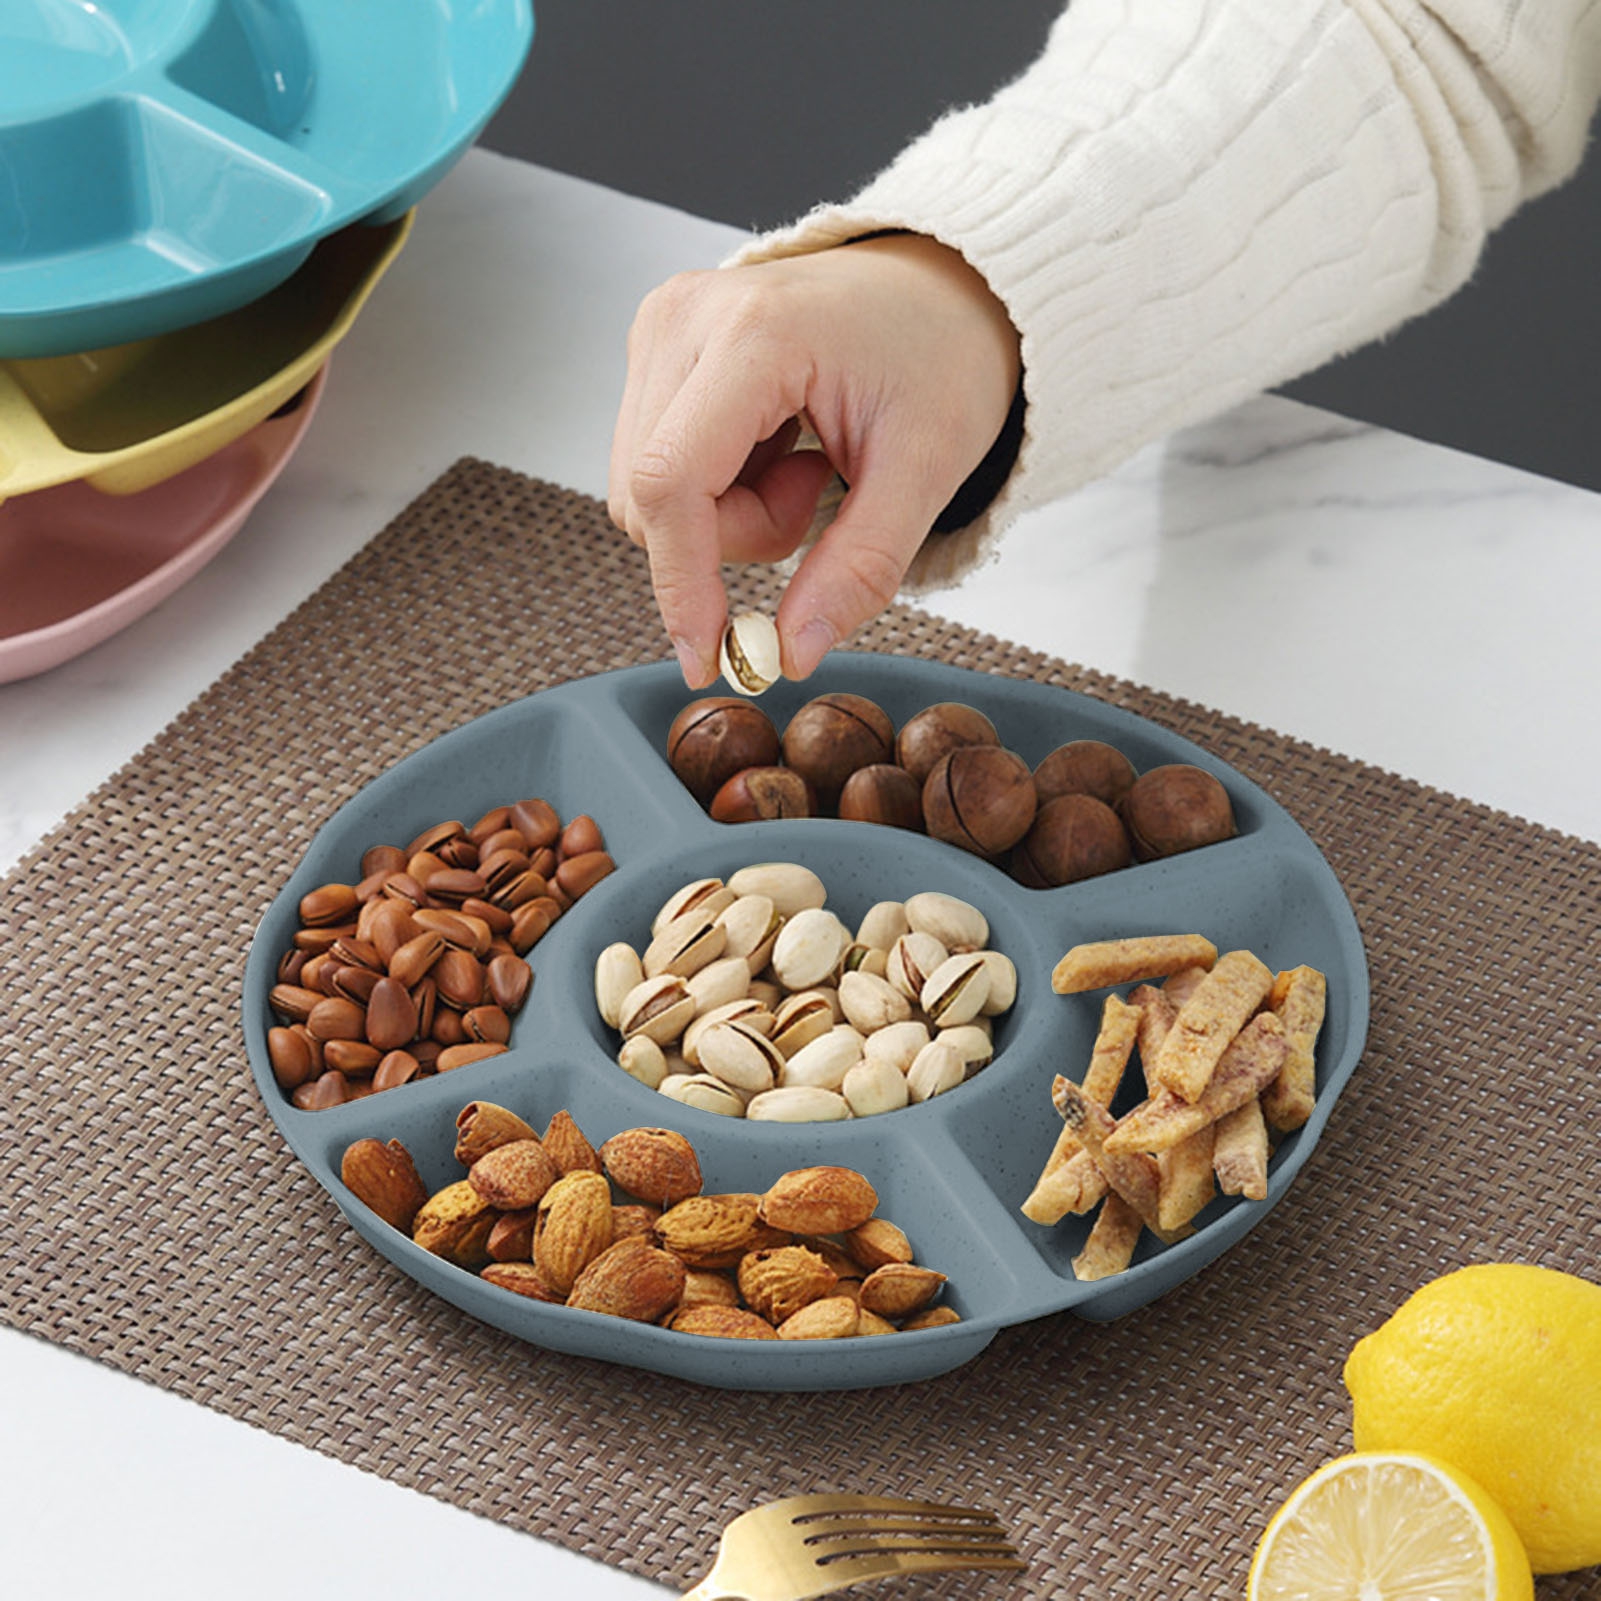 lsiaeian Sectional Platter Divided Serving Dishes Appetizer Serving Trays with 5 Compartments Platter Tray Veggie Tray Chip Dip Tray Divided Snack Trays for Fruit Nut Candy Party - image 3 of 8